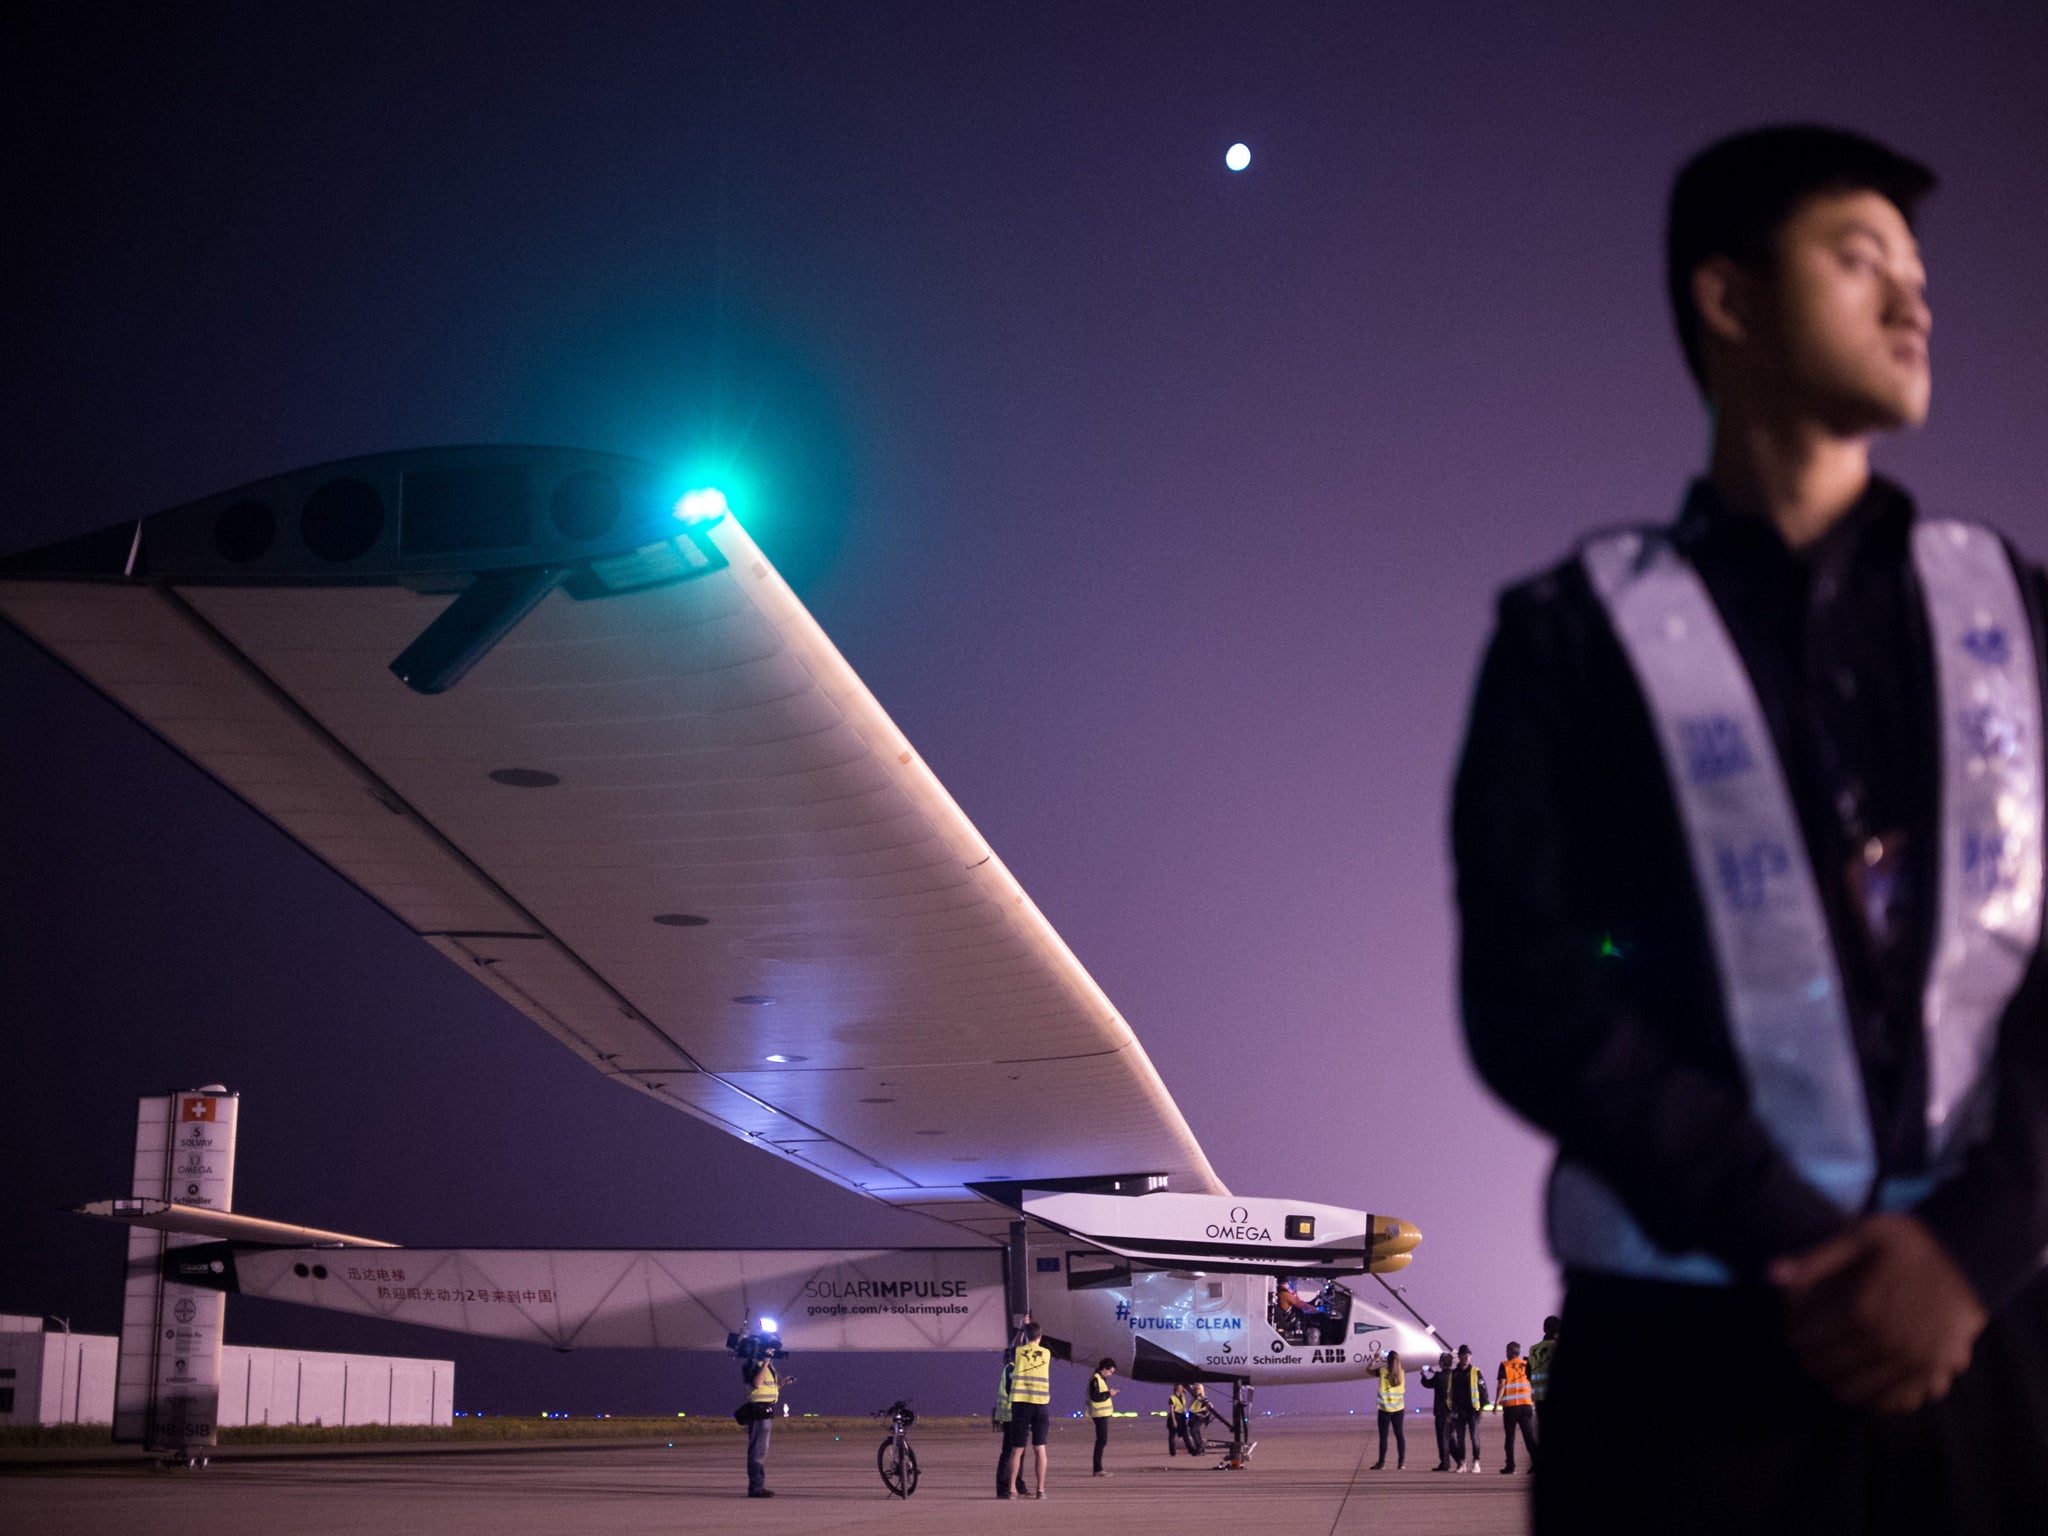 Chinese security staff member stands guard shortly before the Swiss-made solar-powered plane Solar Impluse 2 takes off from Nanjing's Lukou International Airport in Nanjing, in China's eastern Jiangsu province, early on May 31, 2015